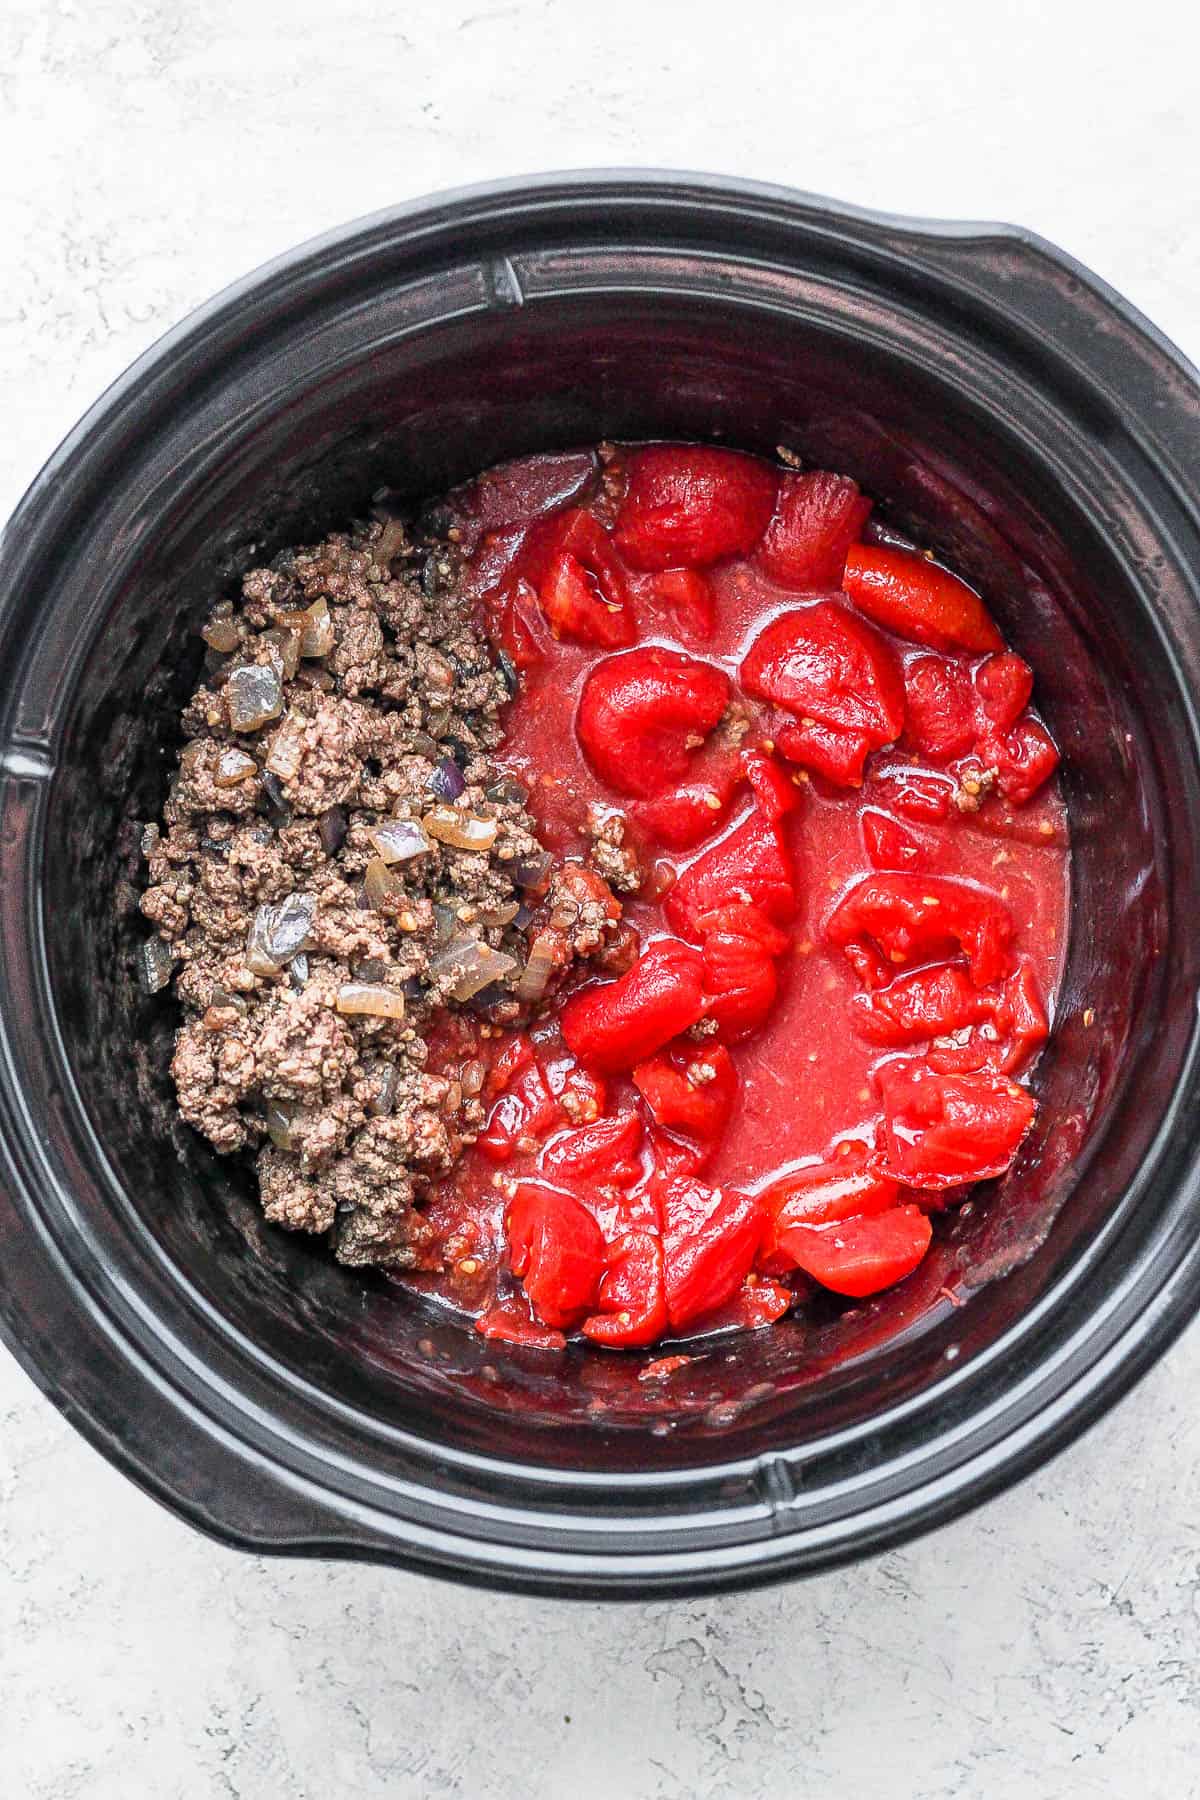 Ground beef and canned tomatoes in a slow cooker.